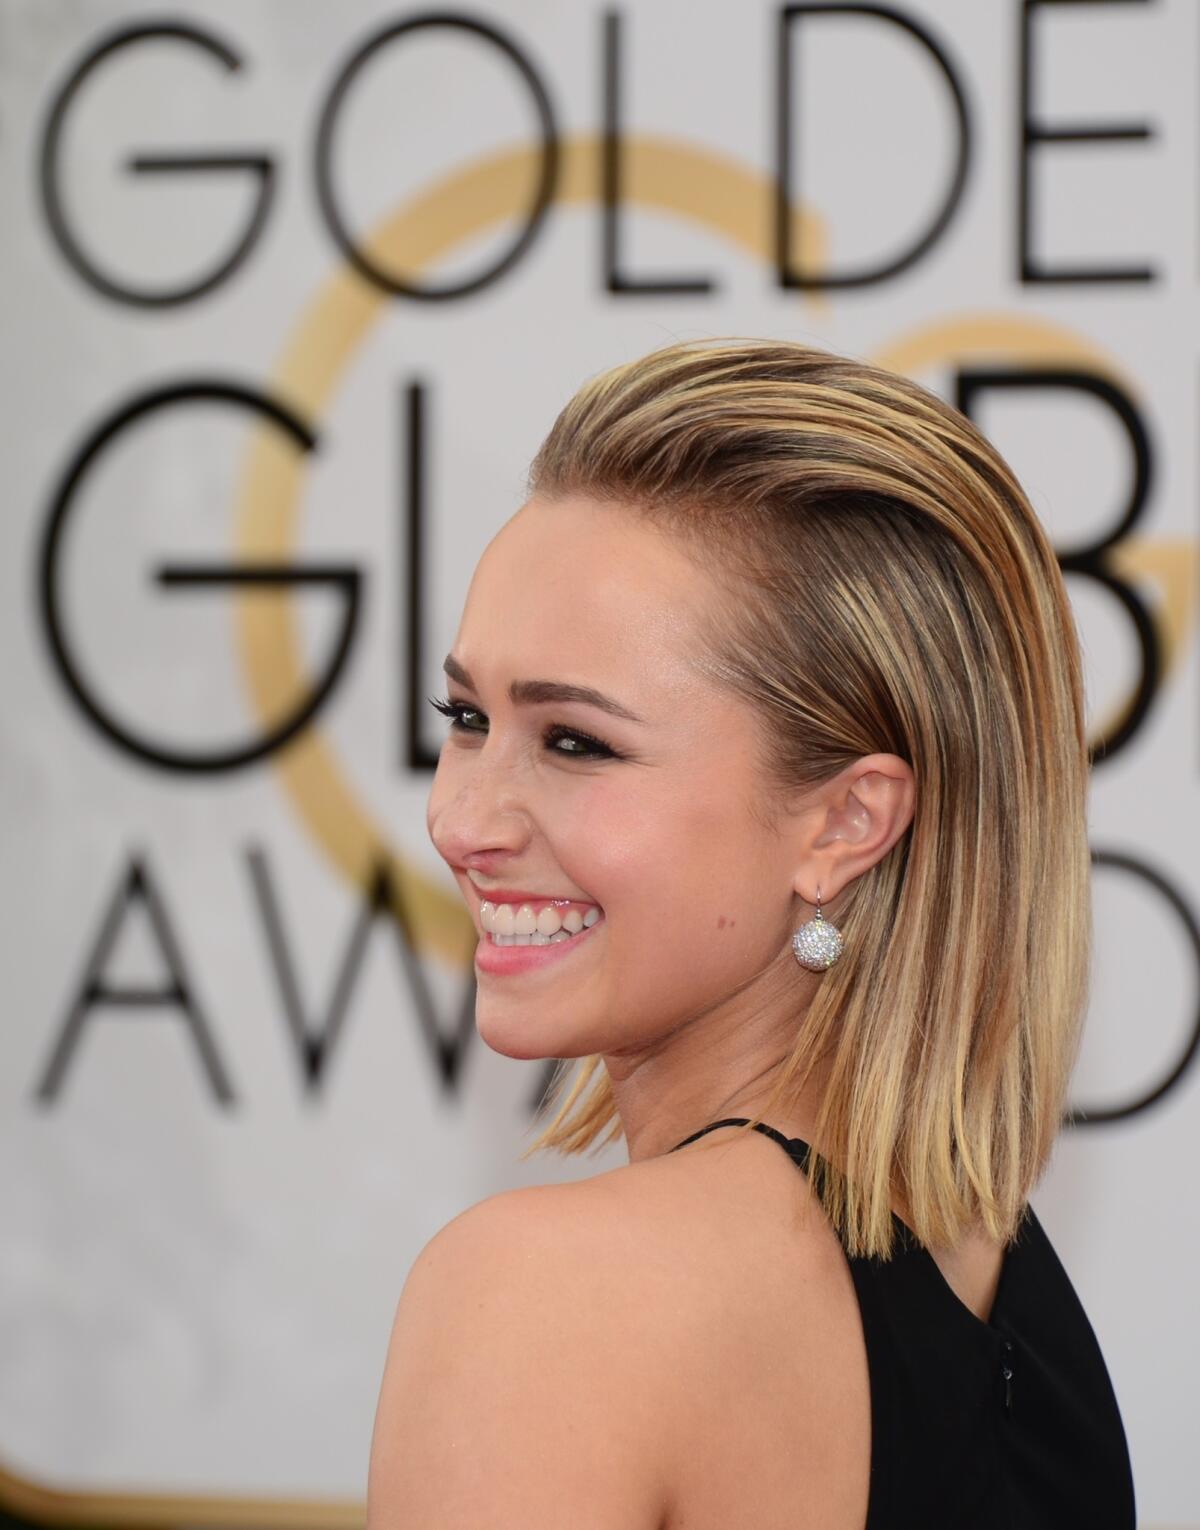 "Nashville" actress Hayden Panettiere wears her hair slicked back for the Golden Globes red carpet.